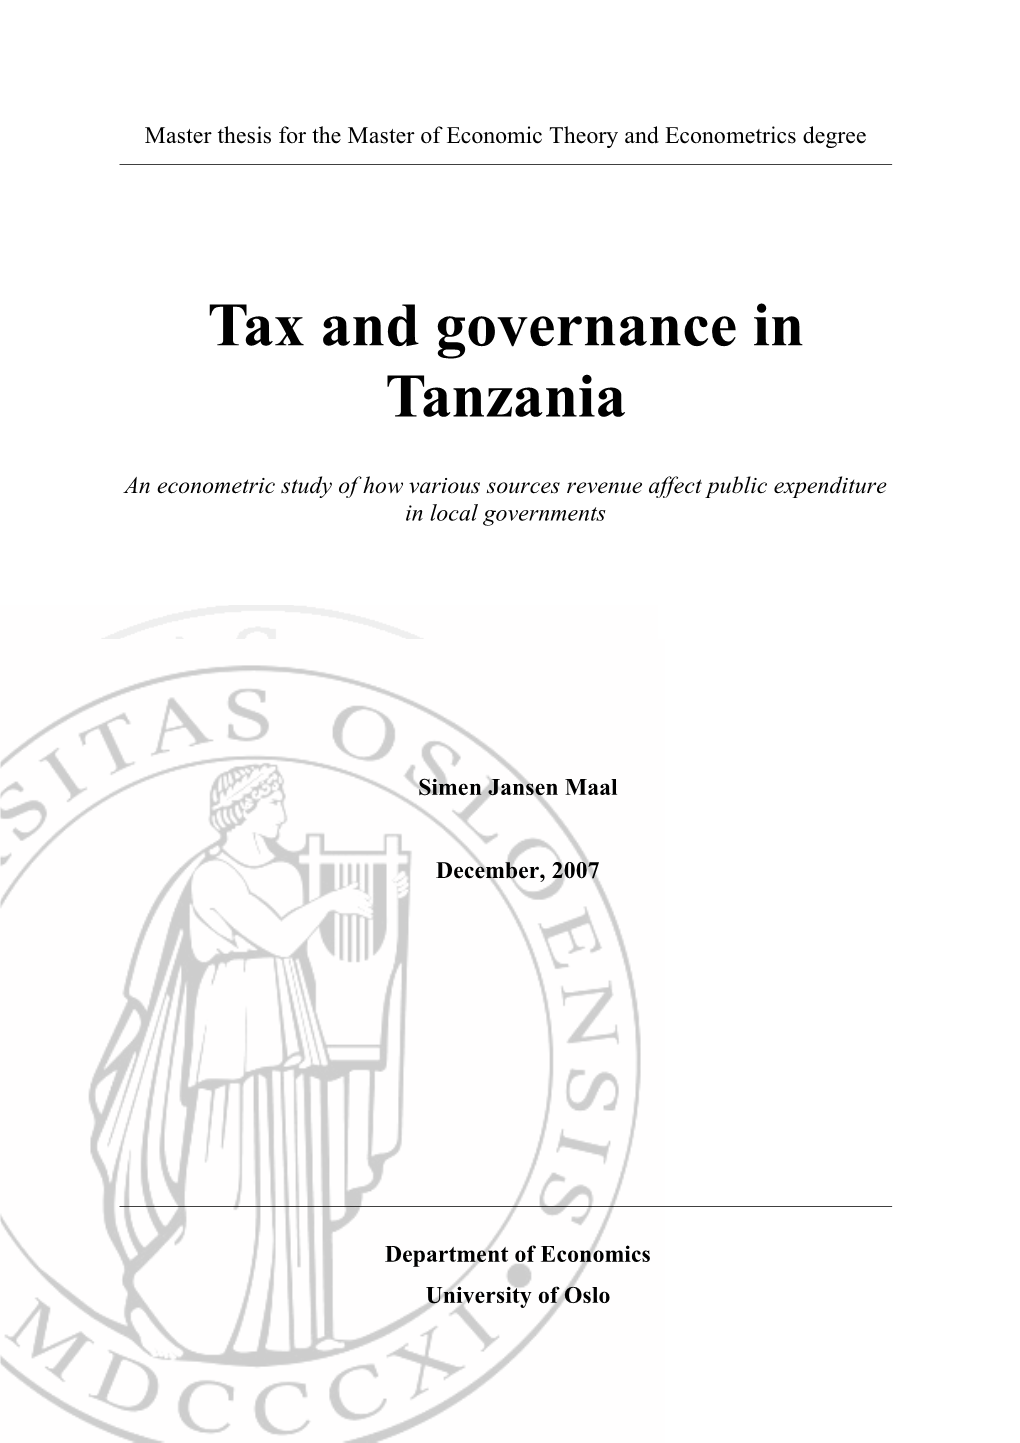 Tax and Governance in Tanzania